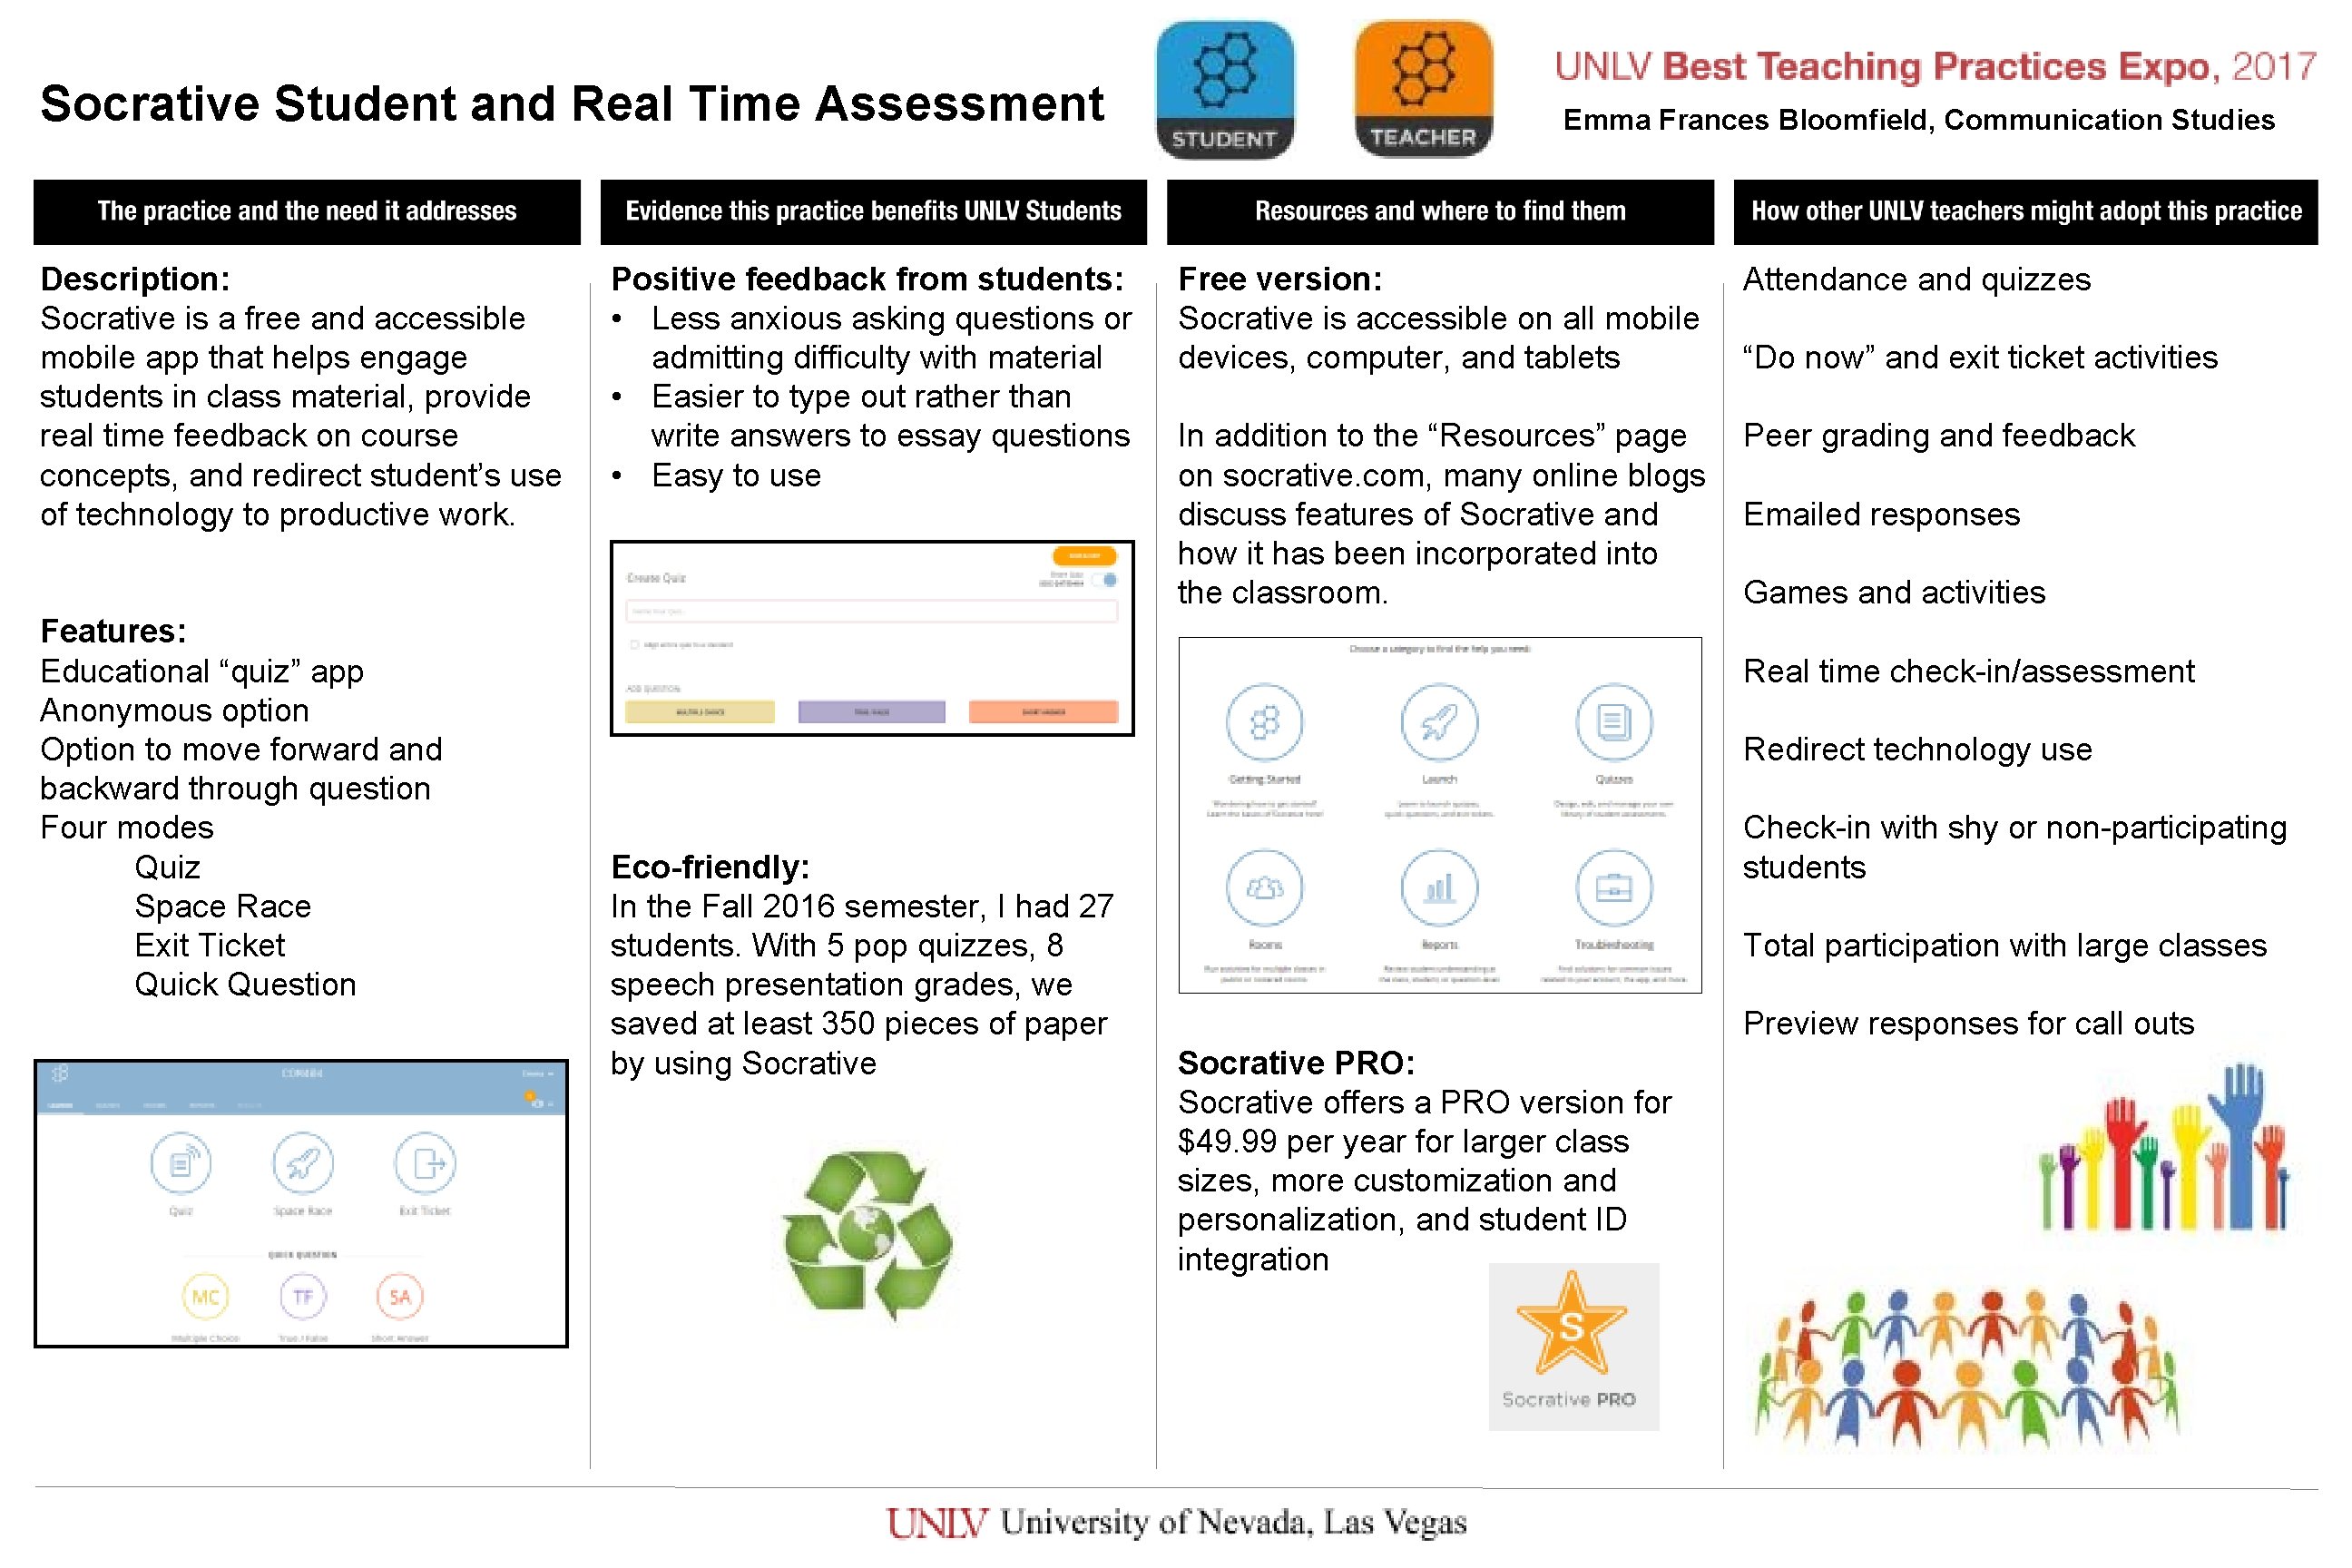 Socrative Student and Real Time Assessment Description: Socrative is a free and accessible mobile